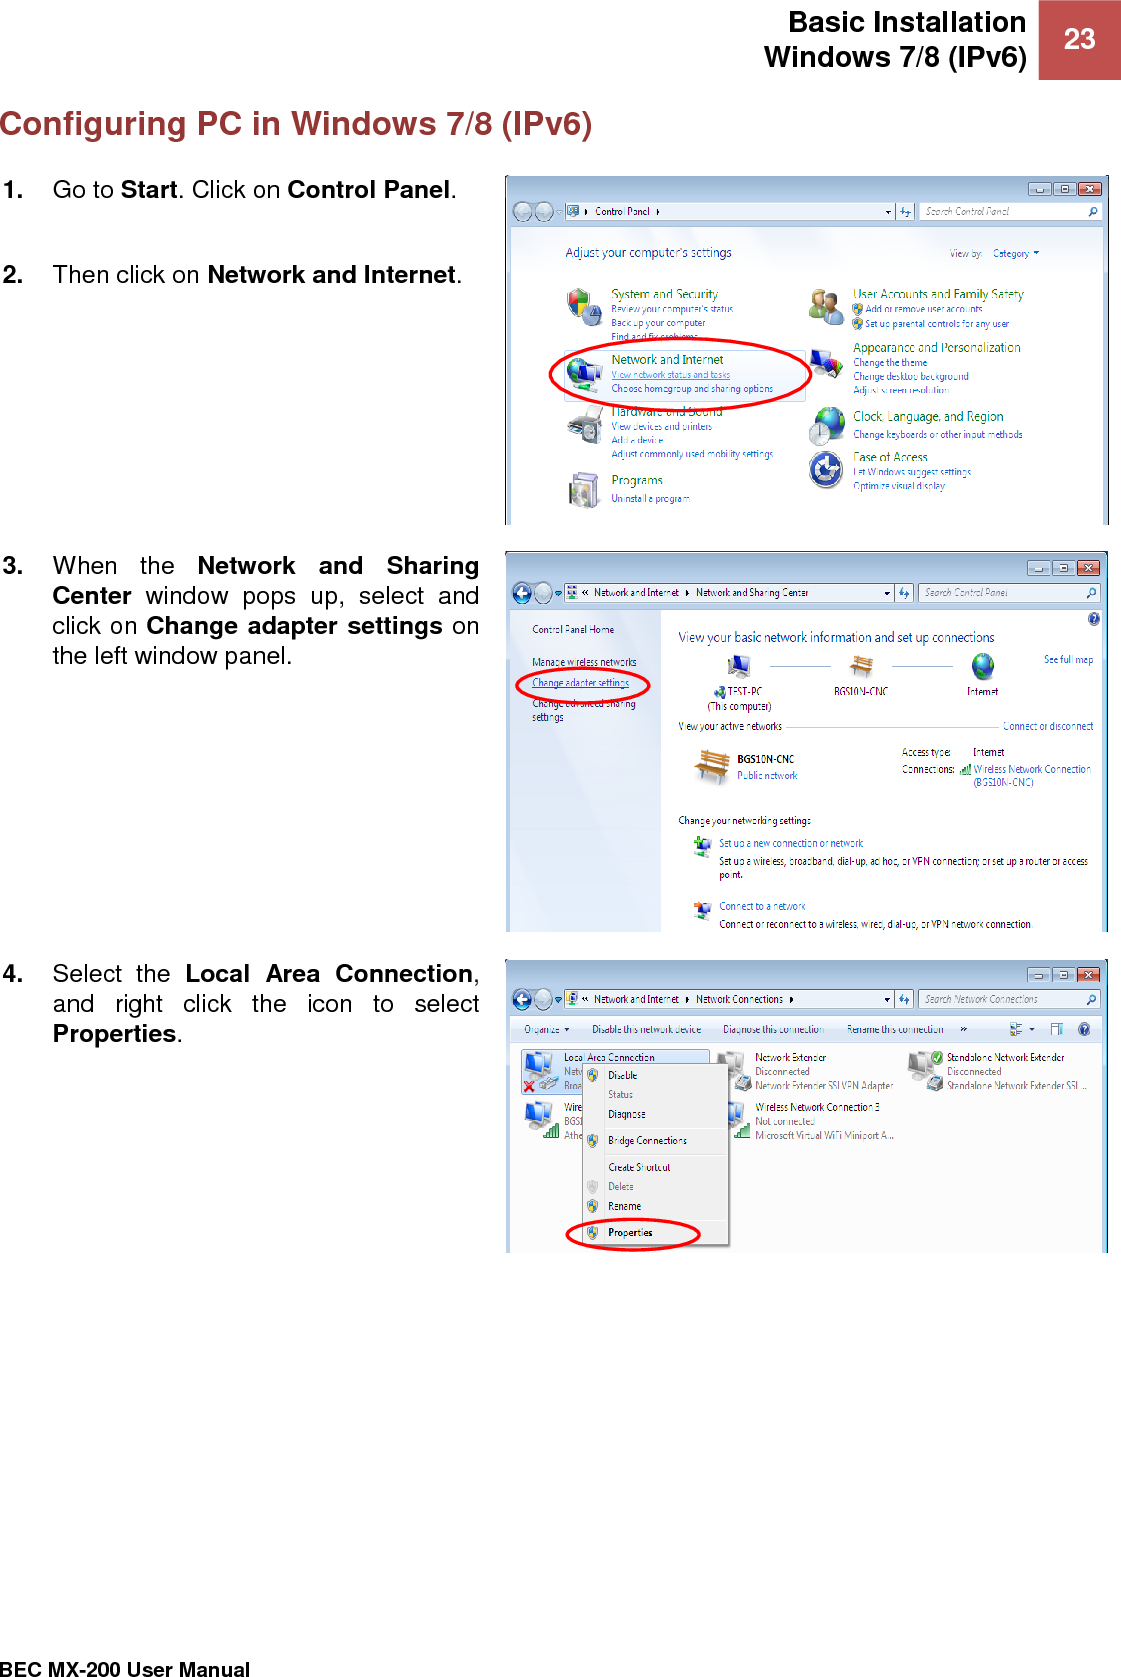 Basic Installation Windows 7/8 (IPv6) 23   BEC MX-200 User Manual  Configuring PC in Windows 7/8 (IPv6) 1. Go to Start. Click on Control Panel.  2. Then click on Network and Internet.  3. When  the  Network  and  Sharing Center  window  pops  up,  select  and click on Change adapter settings on the left window panel.  4. Select  the  Local  Area  Connection, and  right  click  the  icon  to  select Properties.  